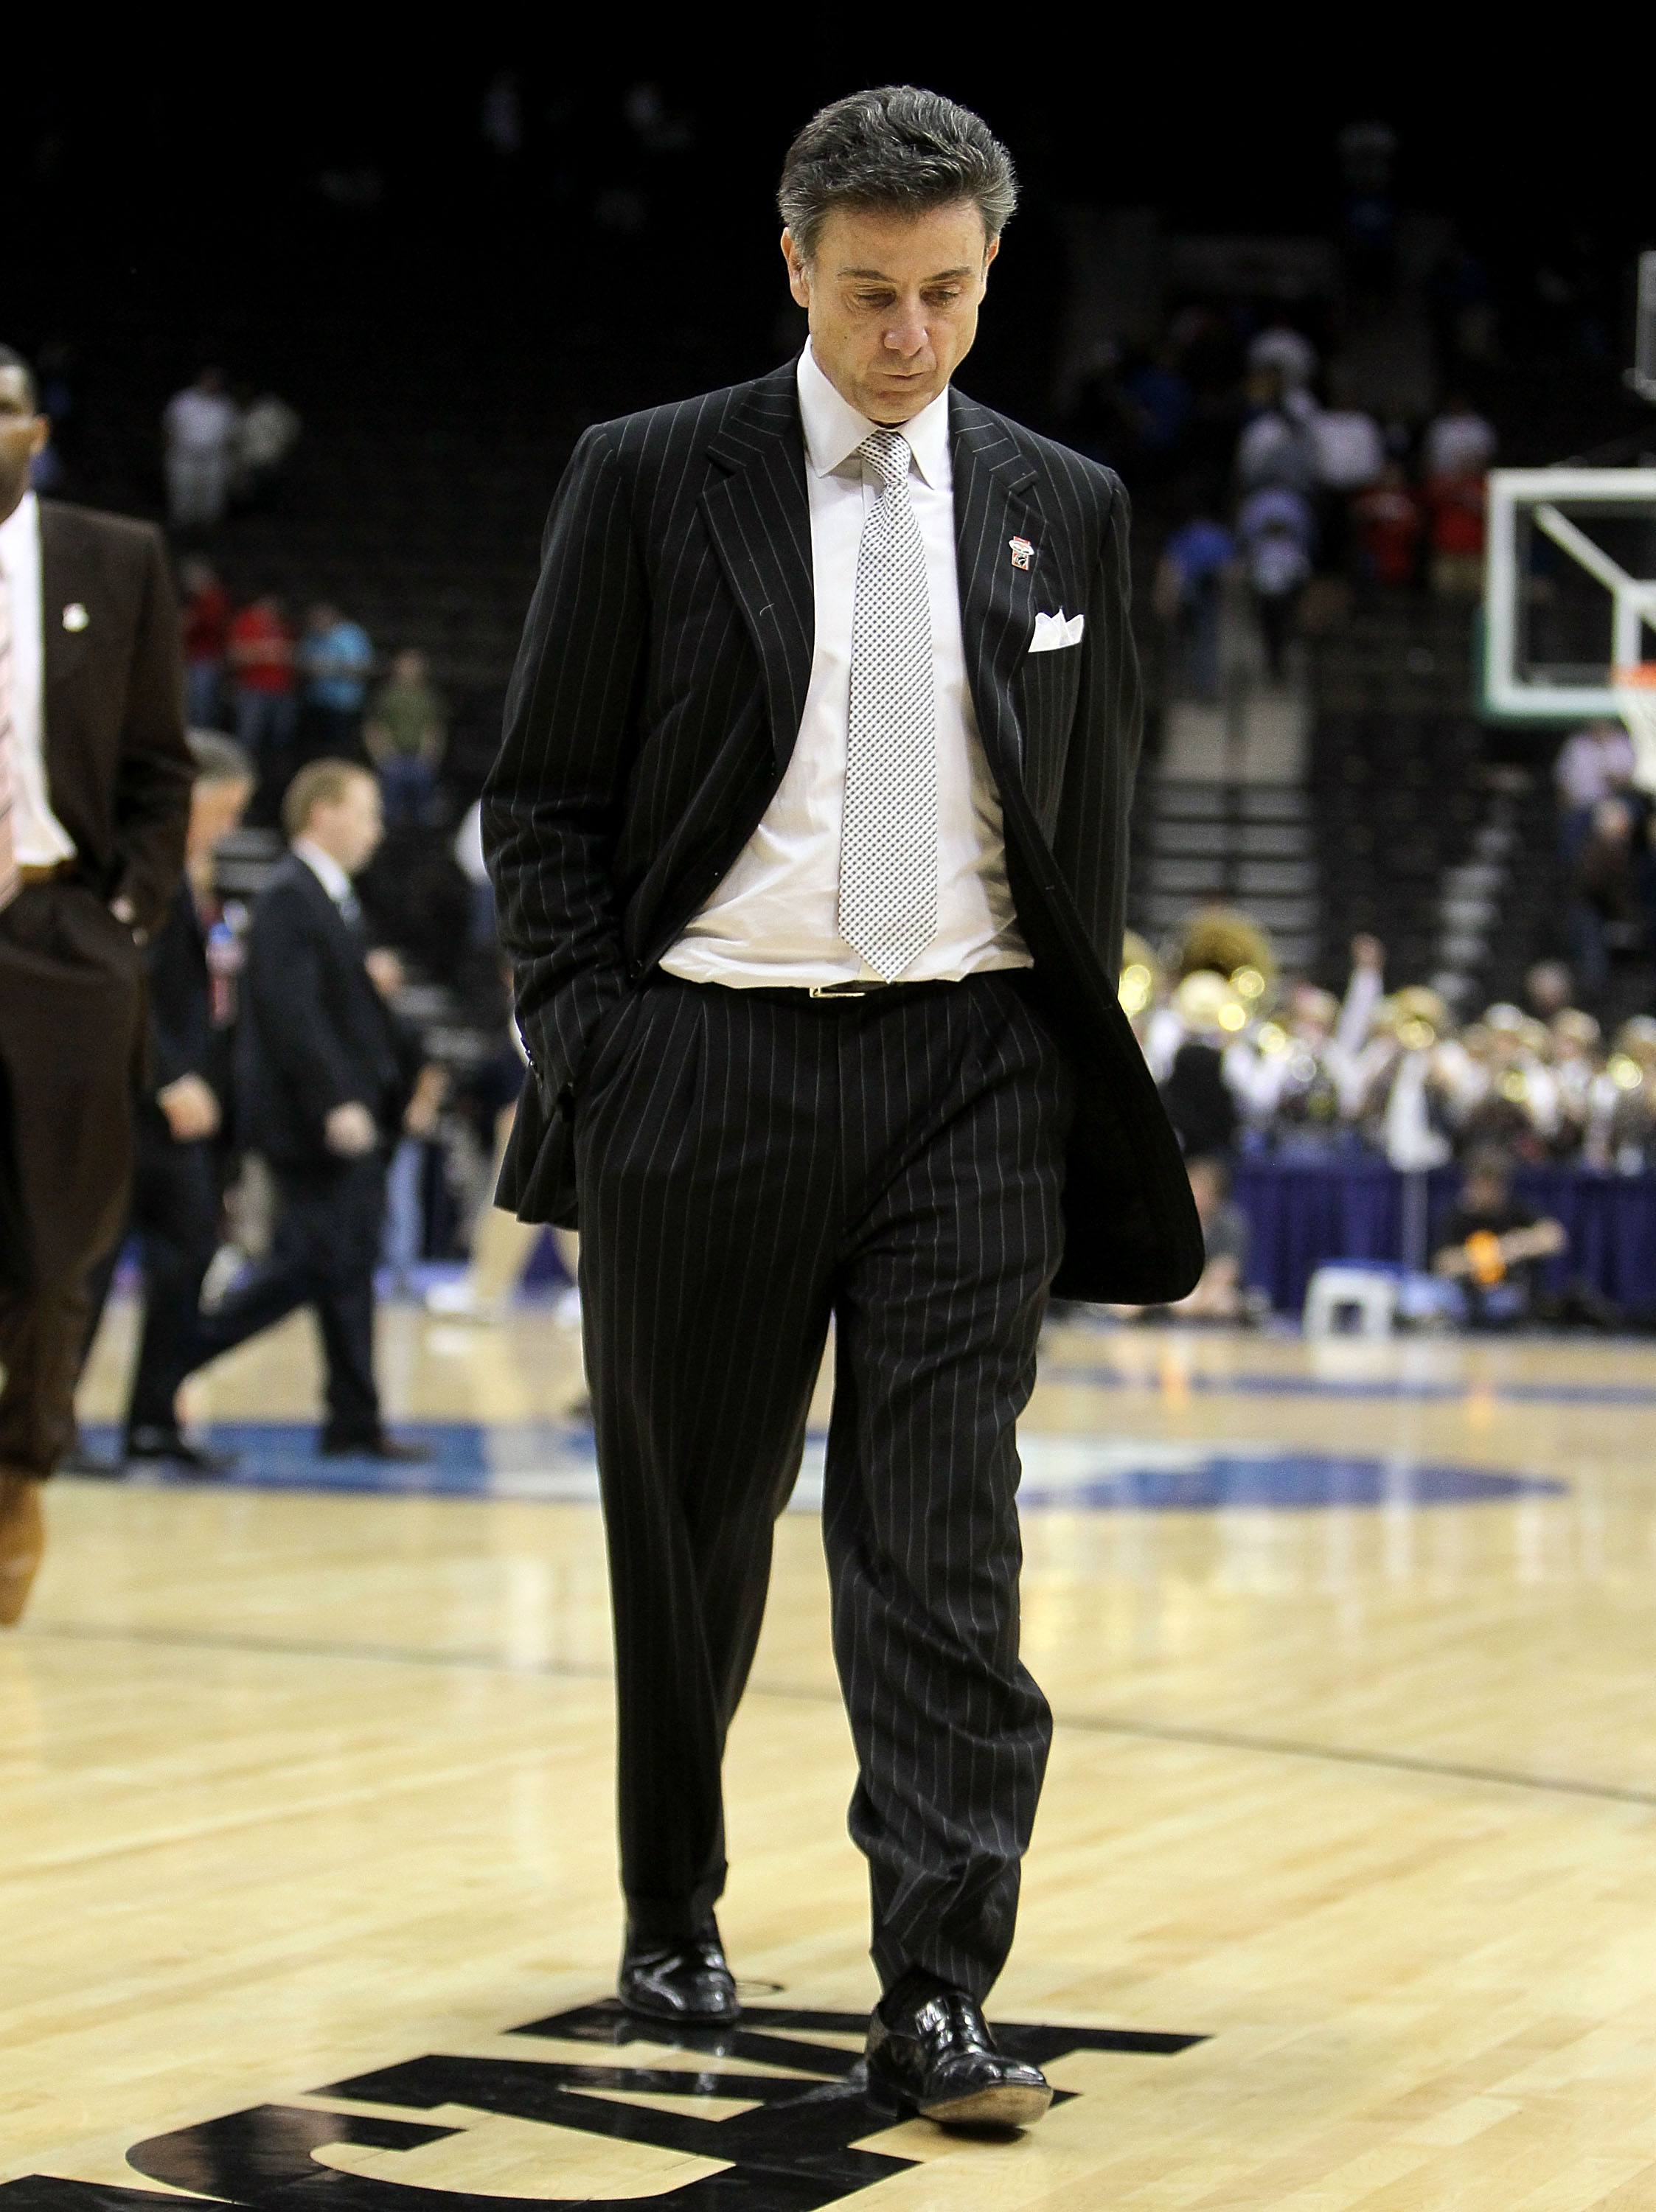 JACKSONVILLE, FL - MARCH 19: Rick Pitino the Head Coach of the Louisville Cardinals walks off of the court following the game against the California Golden Bears during the first round of the 2010 NCAA men's basketball tournament at Jacksonville Veteran's